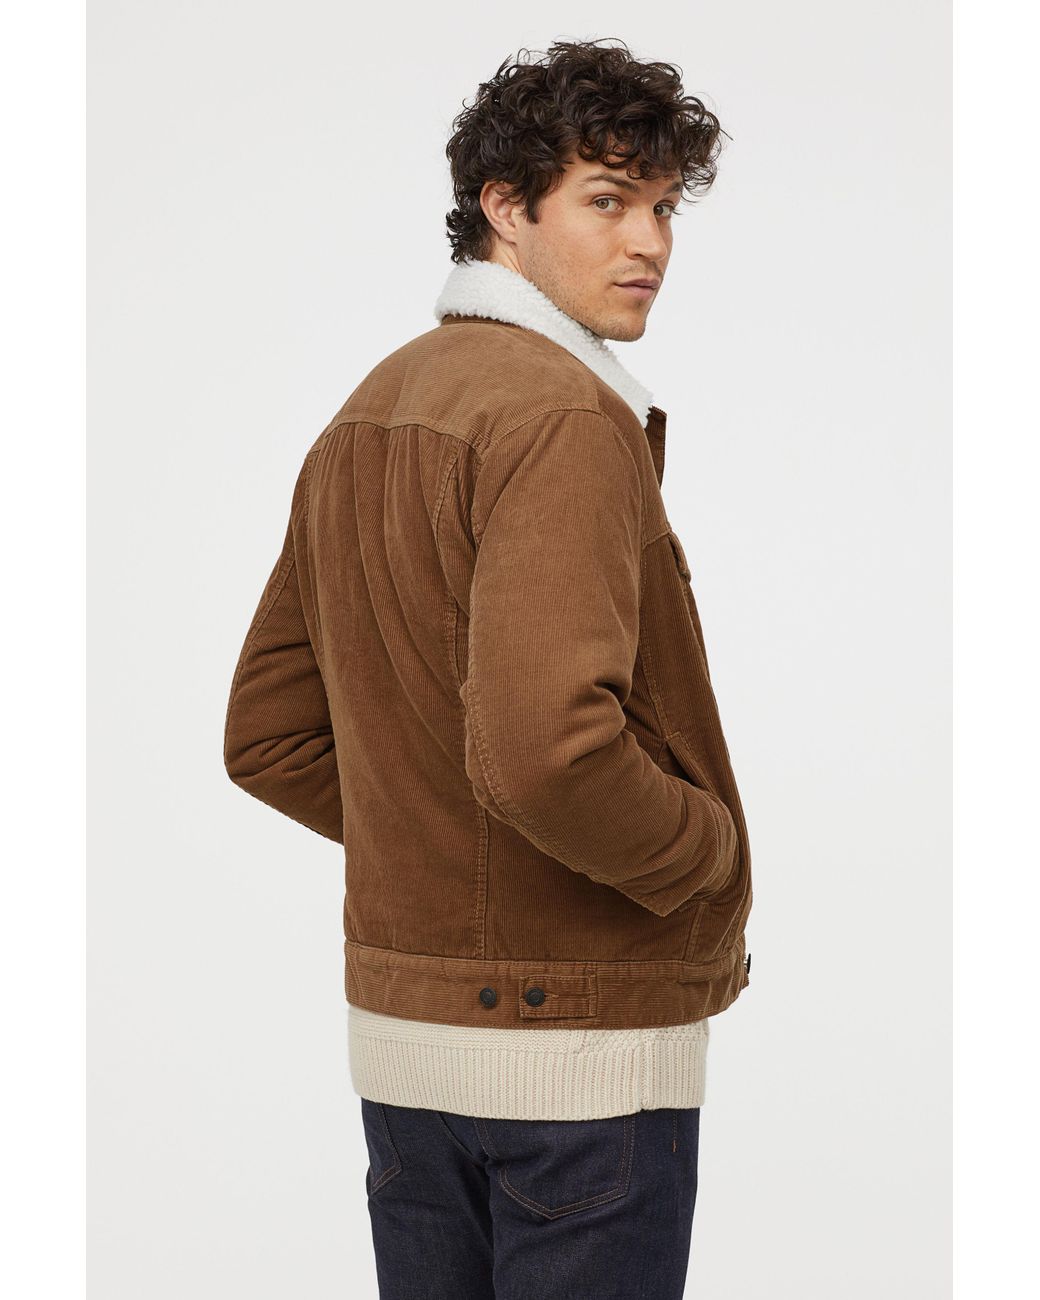 H&M Pile-lined Corduroy Jacket in Light Brown (Brown) for Men | Lyst